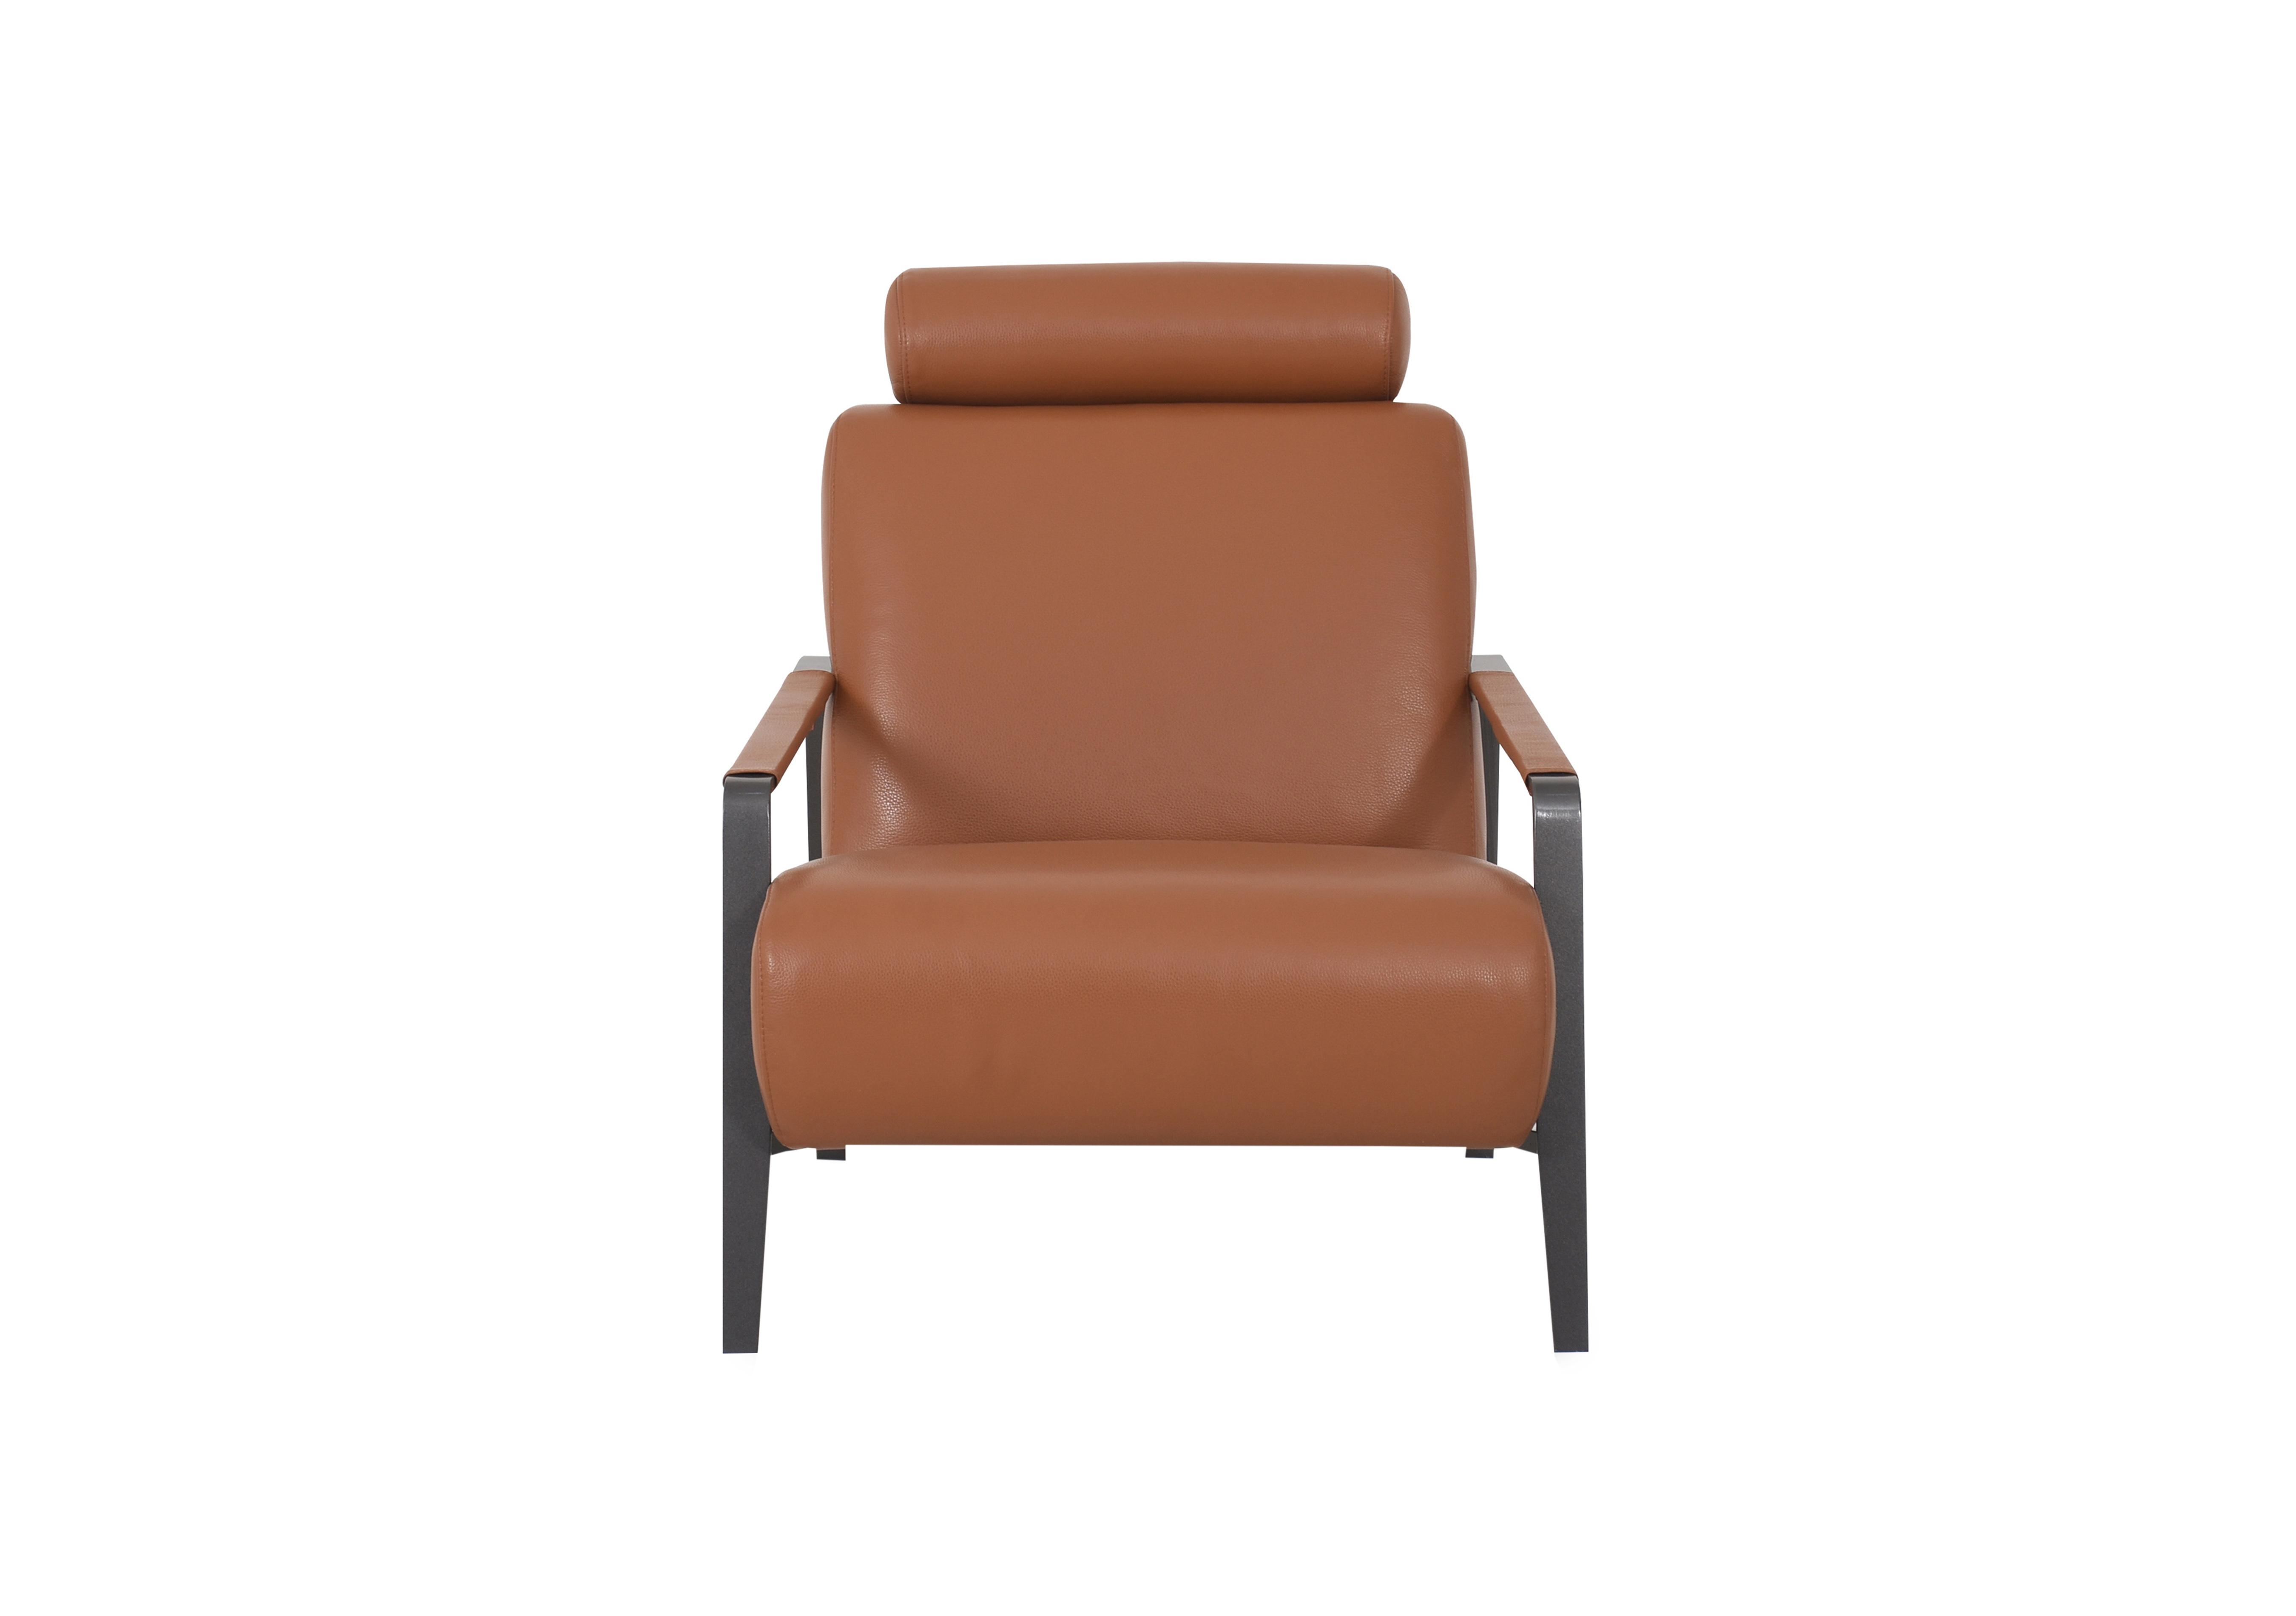 Lawson Leather Accent Chair in Nn-575e Caramel on Furniture Village